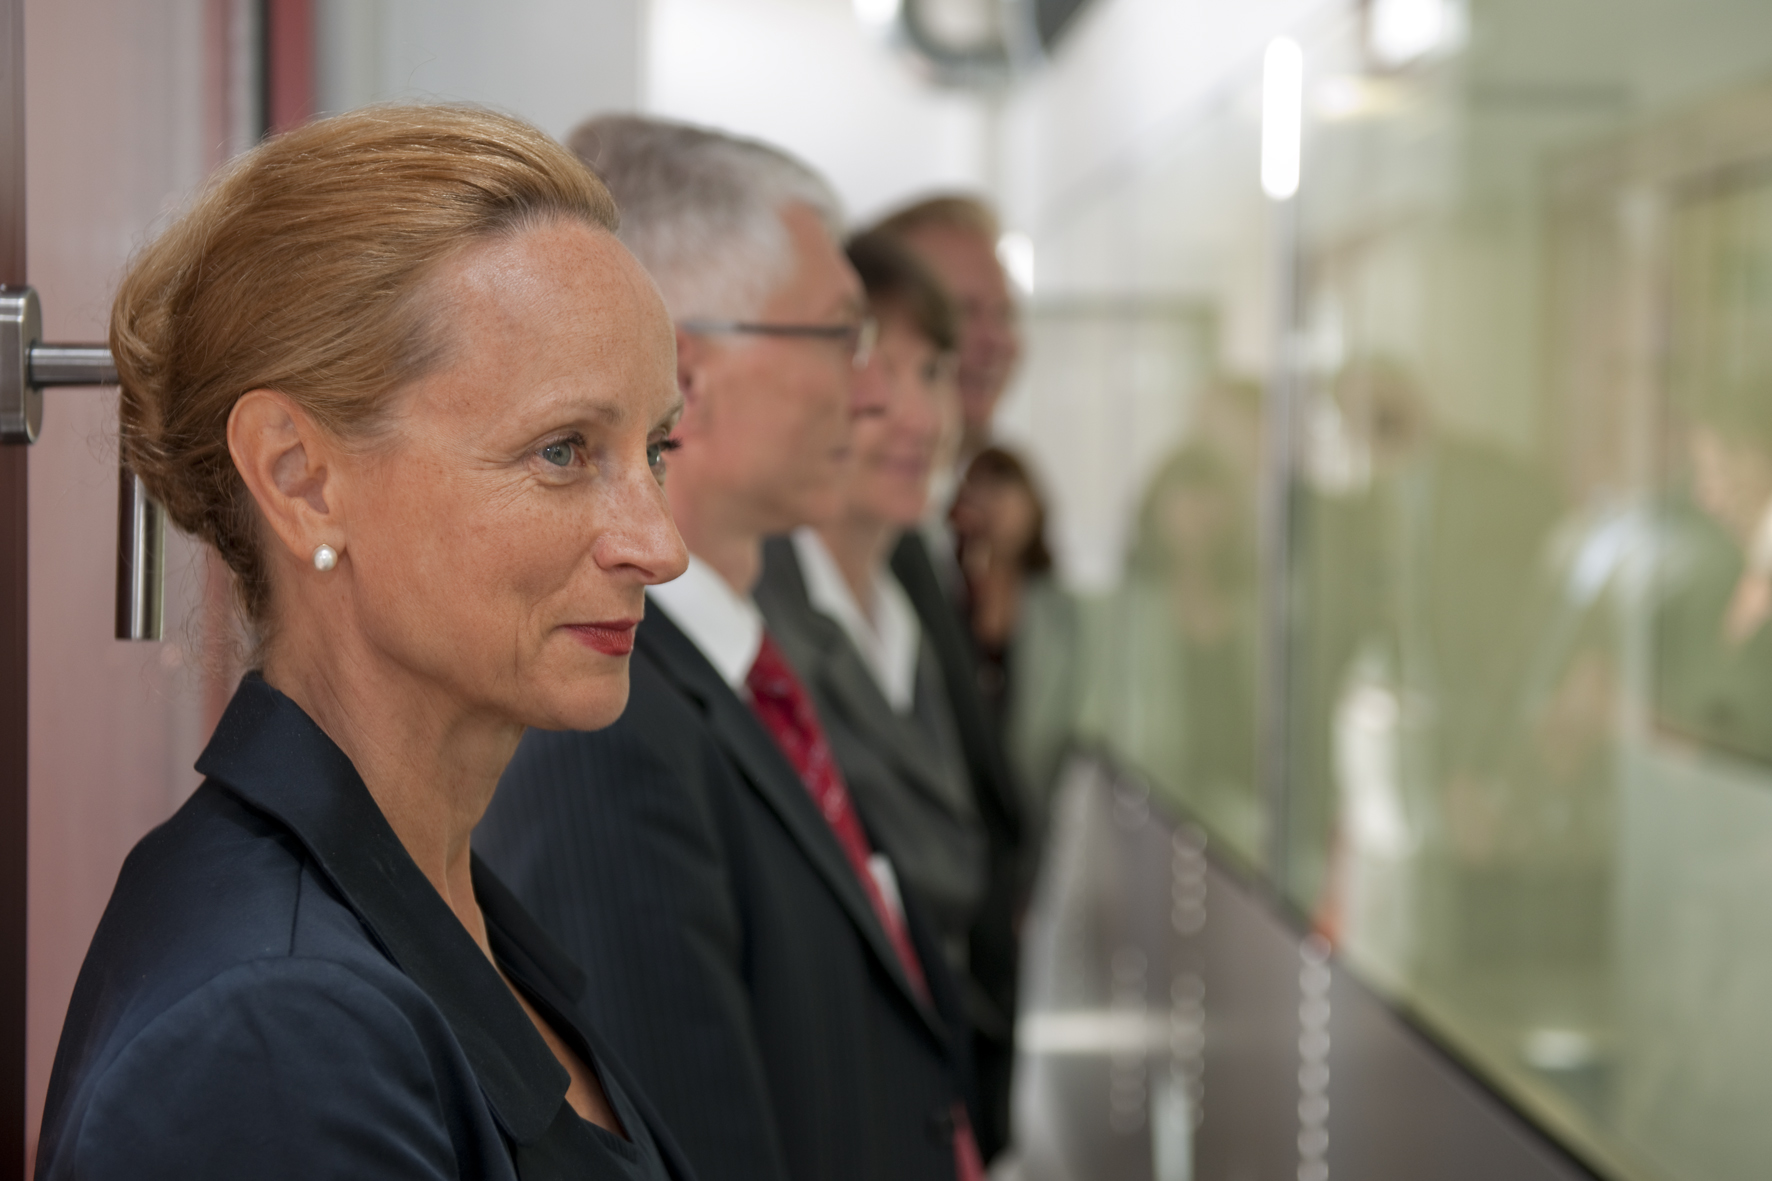 To commemorate the project launch, State Minister Prof. Dr. Dr. Sabine von Schorlemer visits the clean room facility of the Fraunhofer IZI, where the first investigational medicinal products for the clinical trial of CVacTM are soon to be produced.